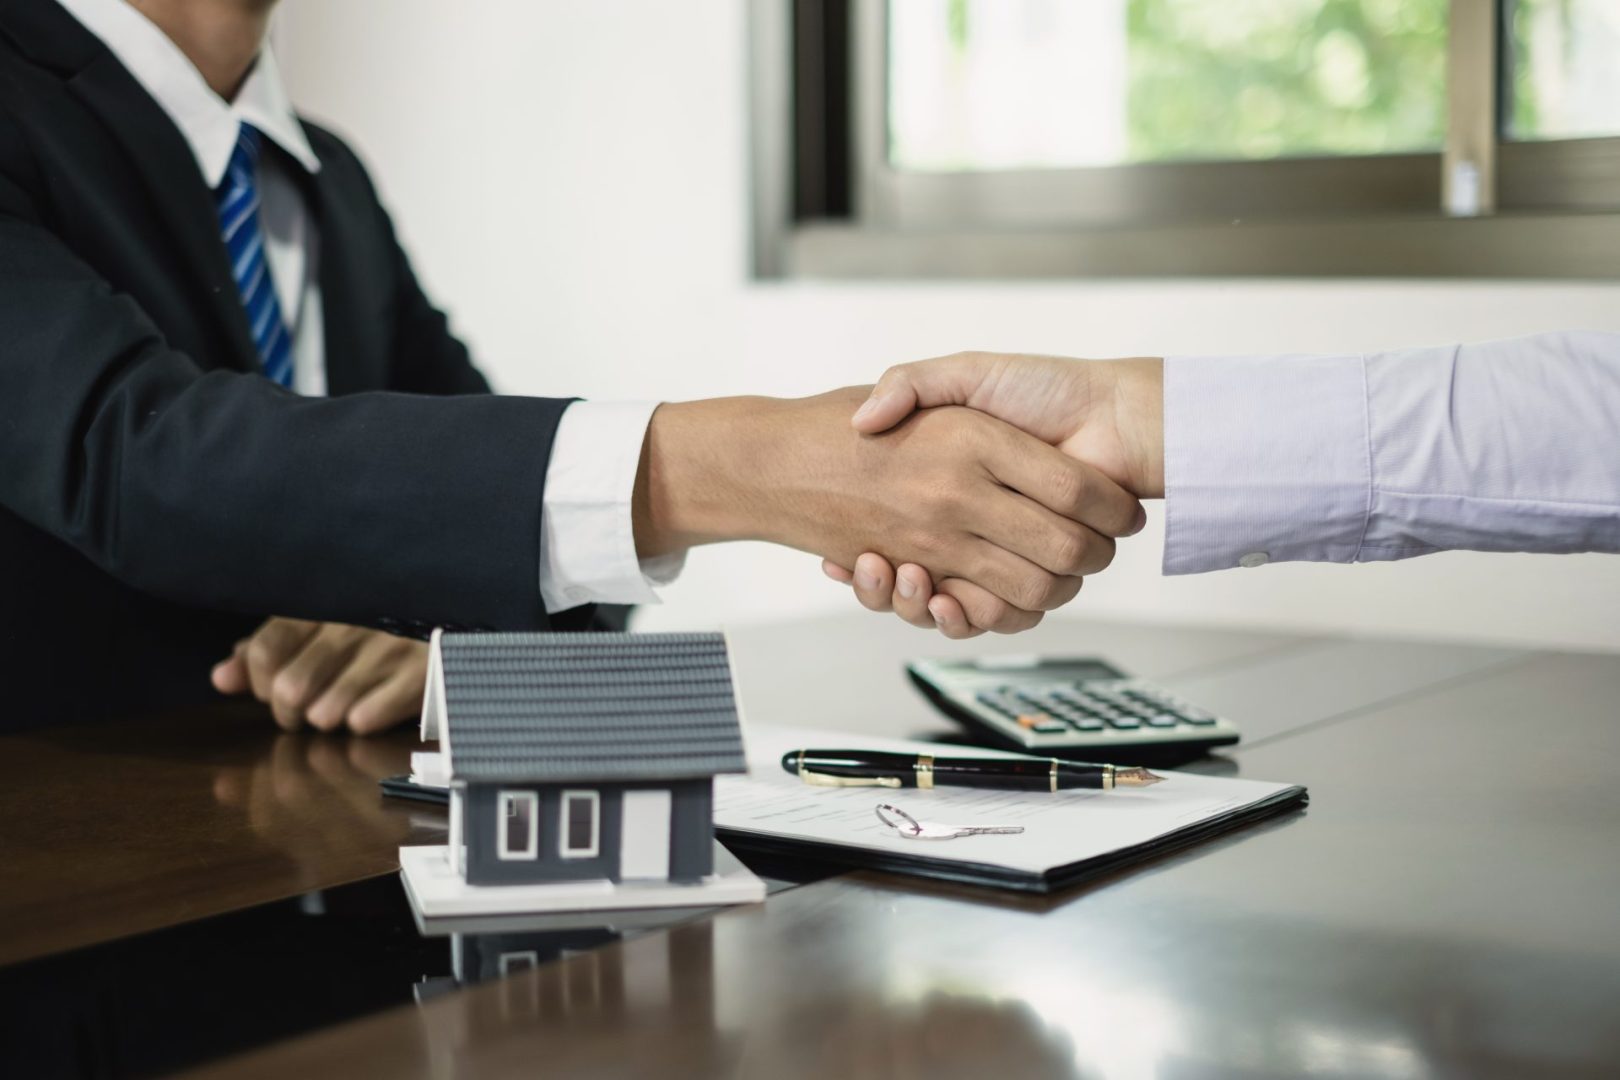 Businessmen and mortgage broker shake hands after completing negotiations to buy a home. Small decorative house, calculator and other stationery nearby.